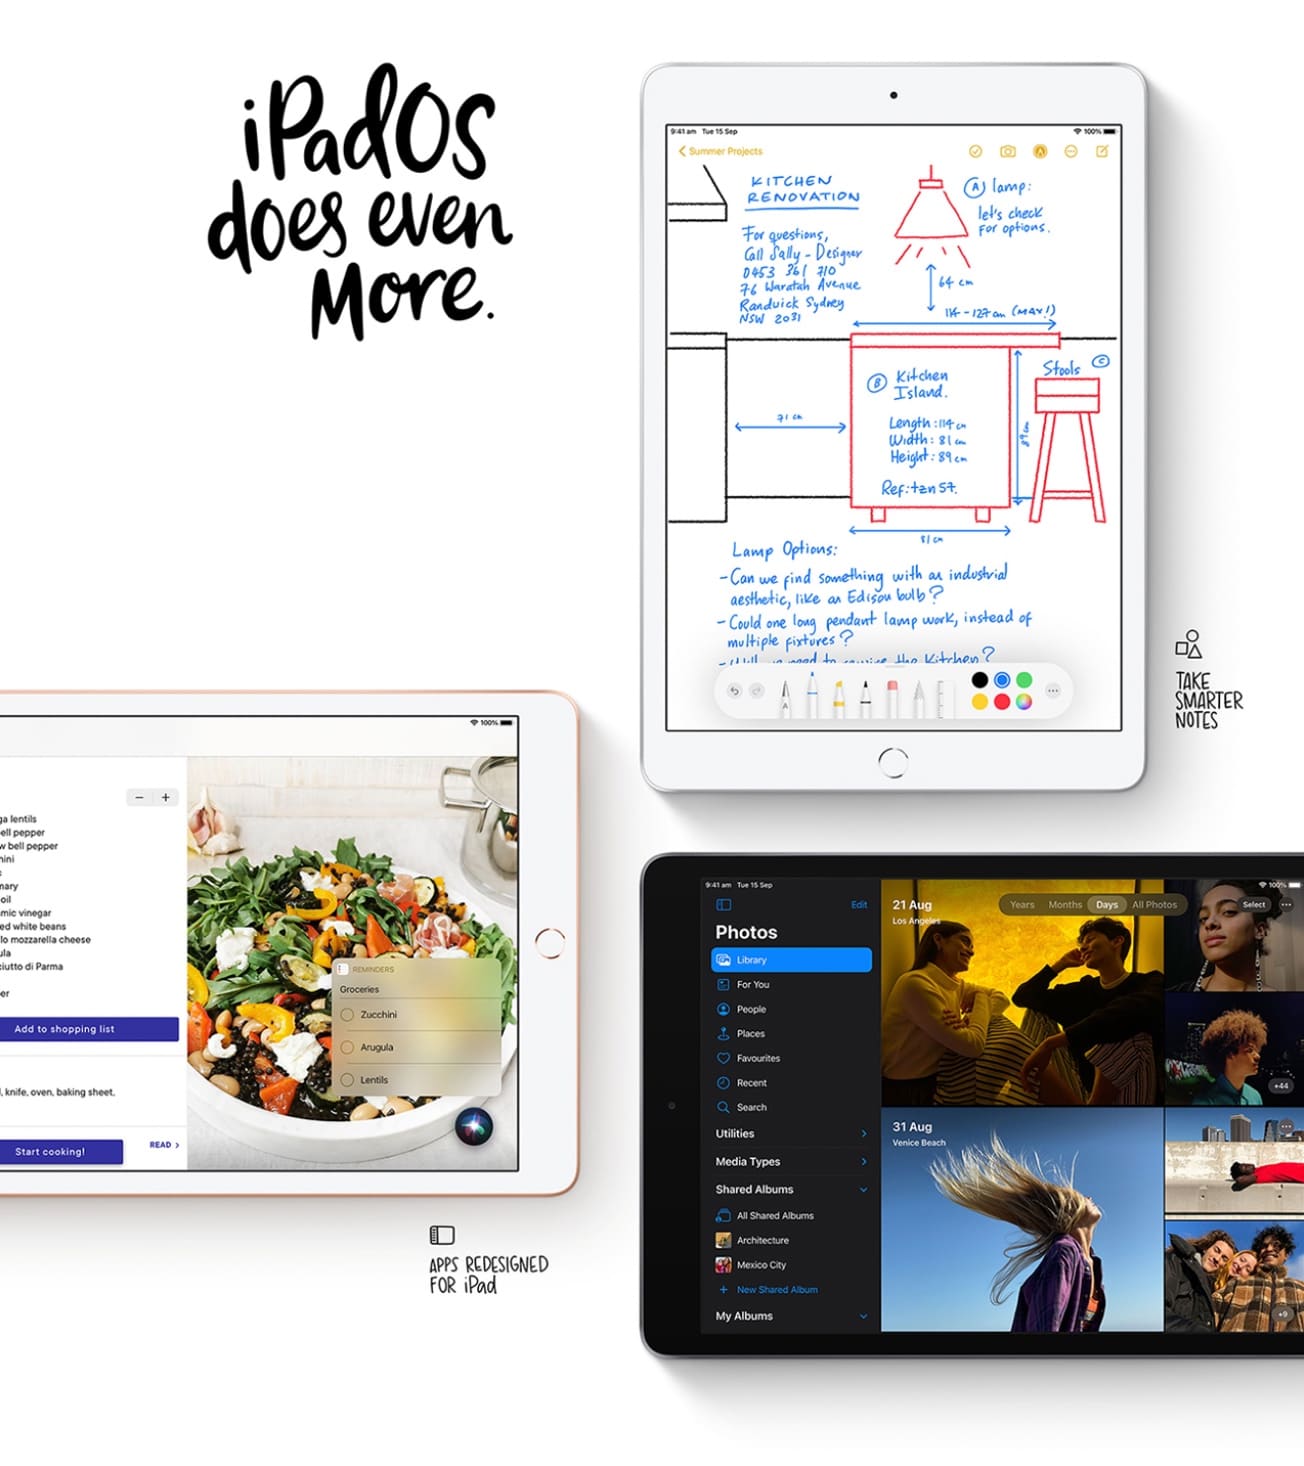 Take smarter notes and with apps redesigned for iPad